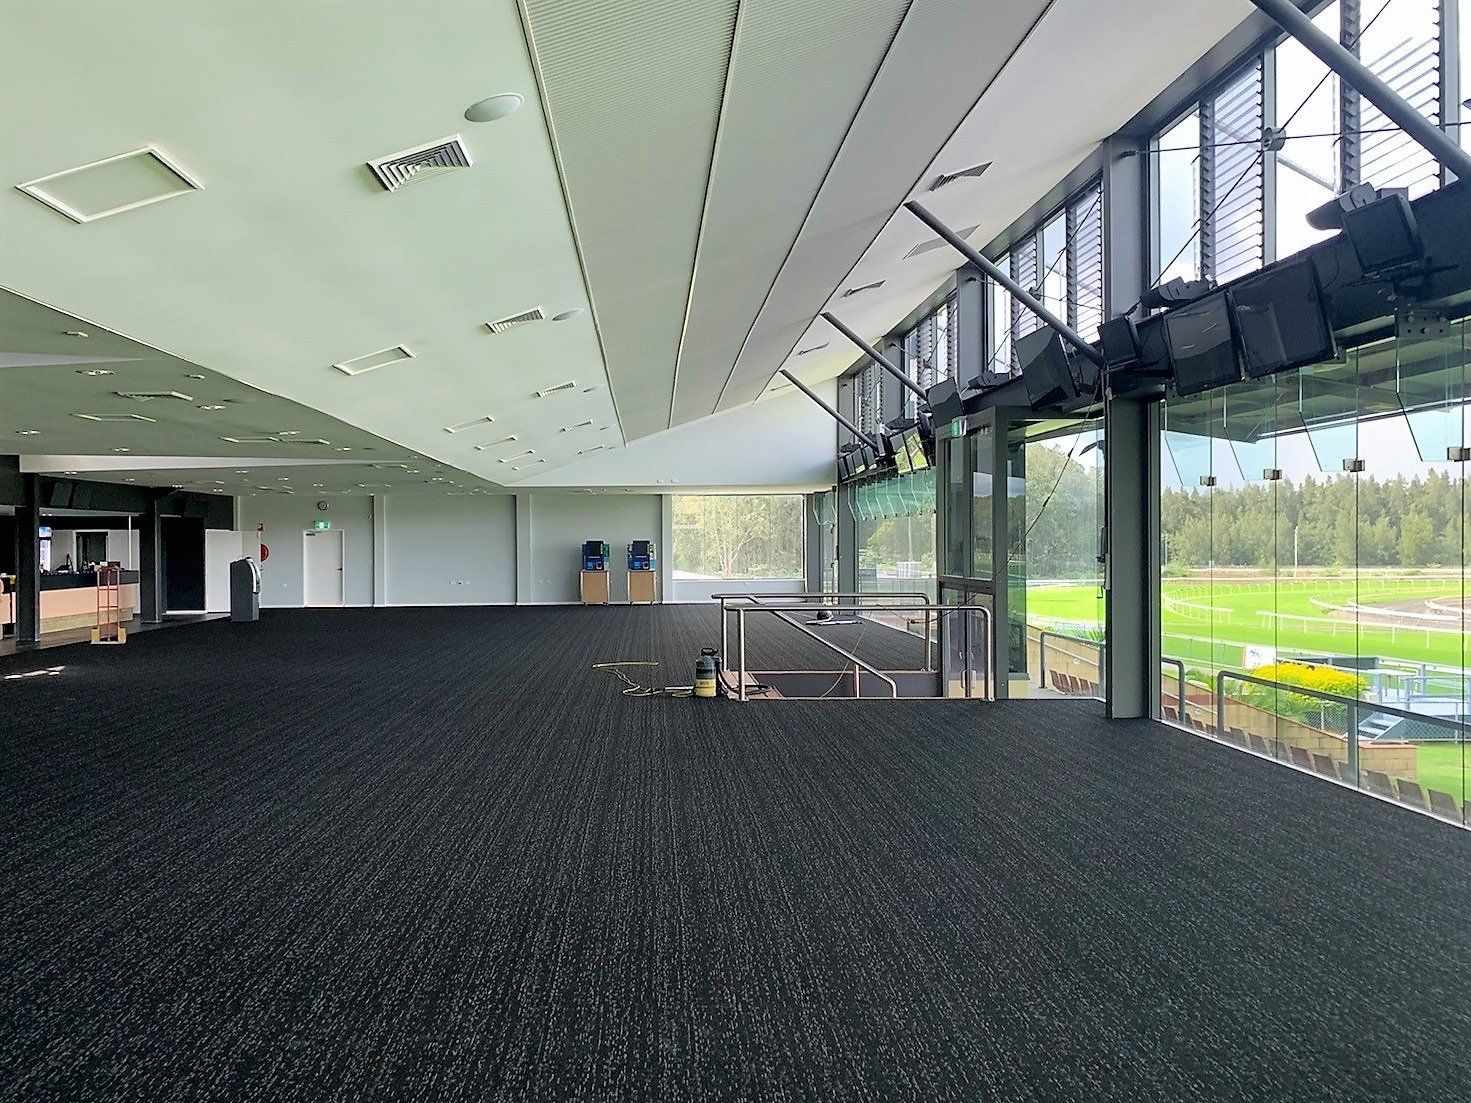 Carpeted Office Floor — Flooring Supply & Installation In Port Macquarie, NSW